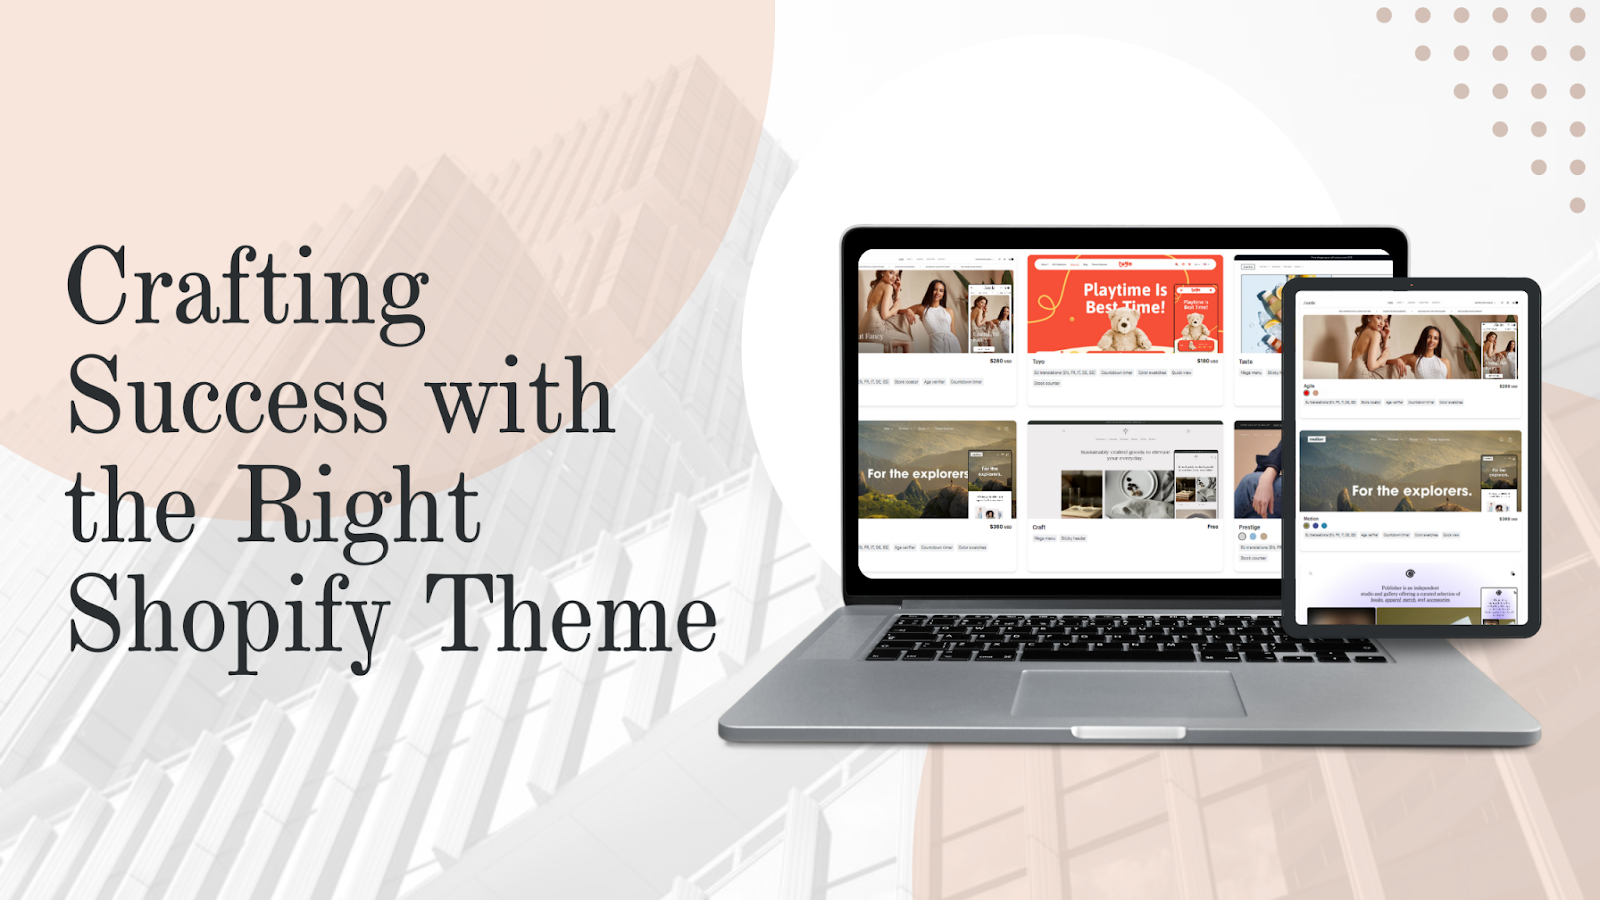 Crafting Success with the Right Shopify Theme